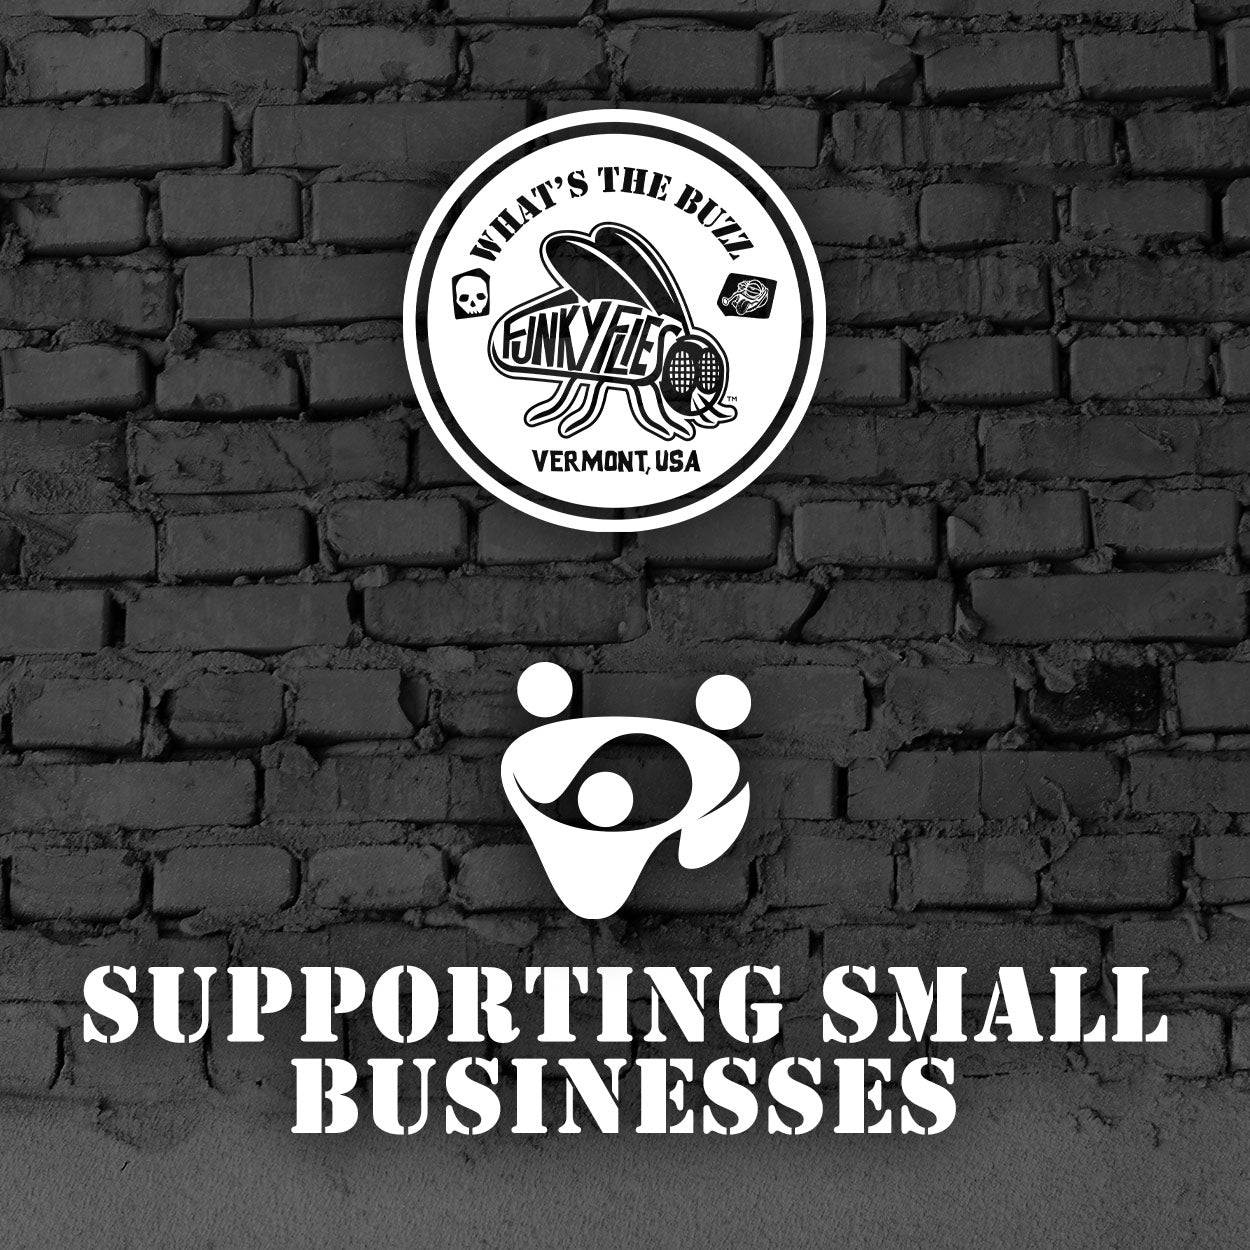 Why Supporting Small Businesses Like Funky Flies Matters